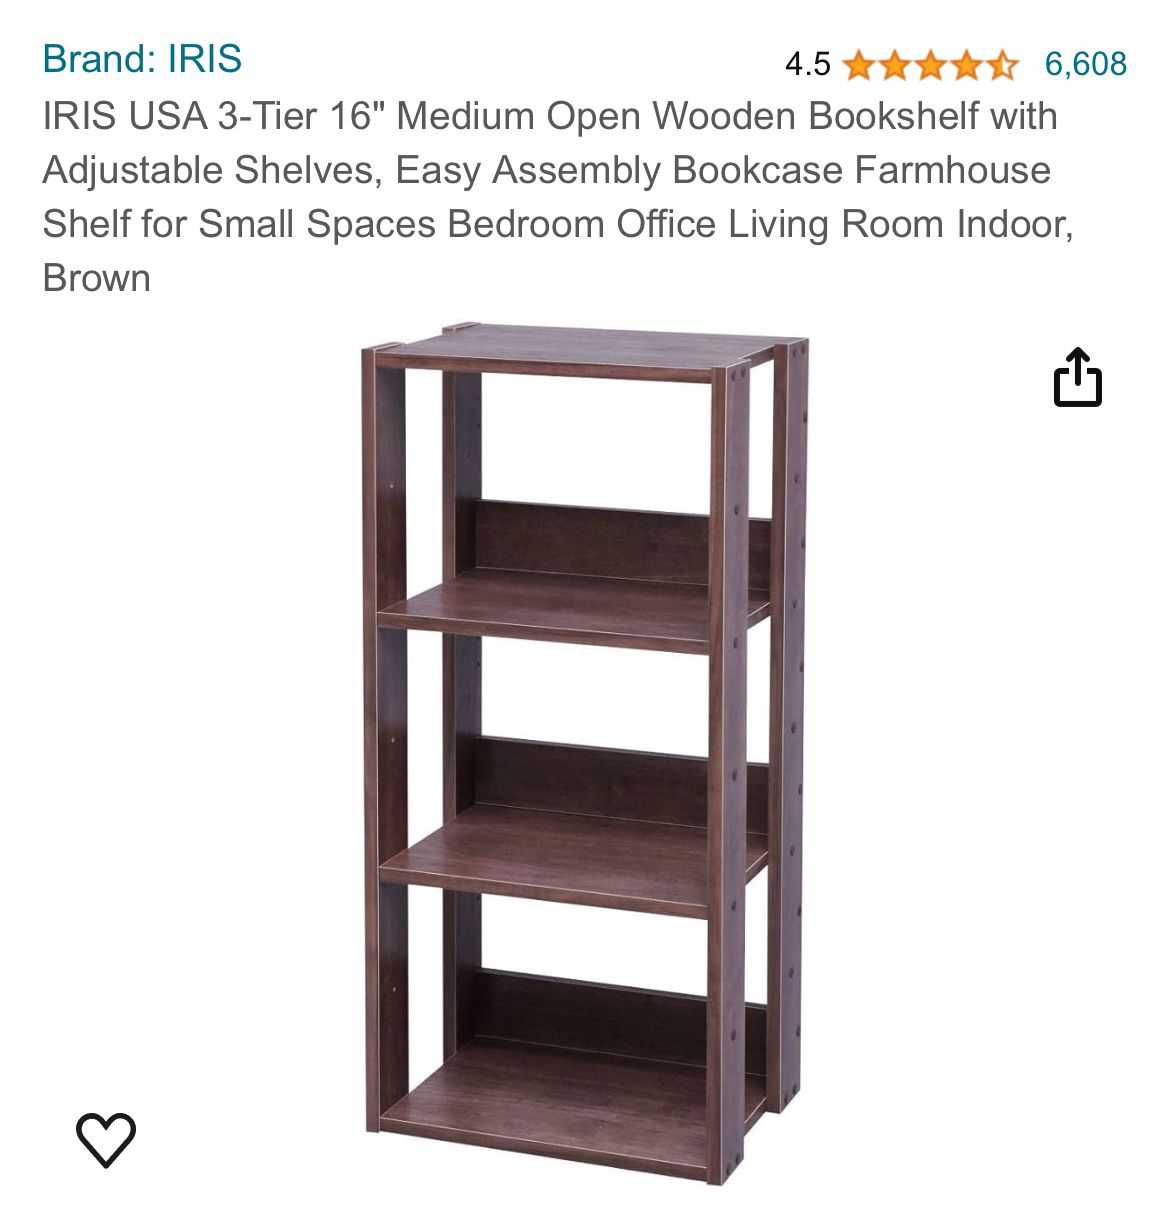 IRIS USA 3-Tier 16" Medium Open Wooden Bookshelf with Adjustable Shelves, Easy Assembly Bookcase Farmhouse Shelf for Small Spaces Bedroom Office Livin